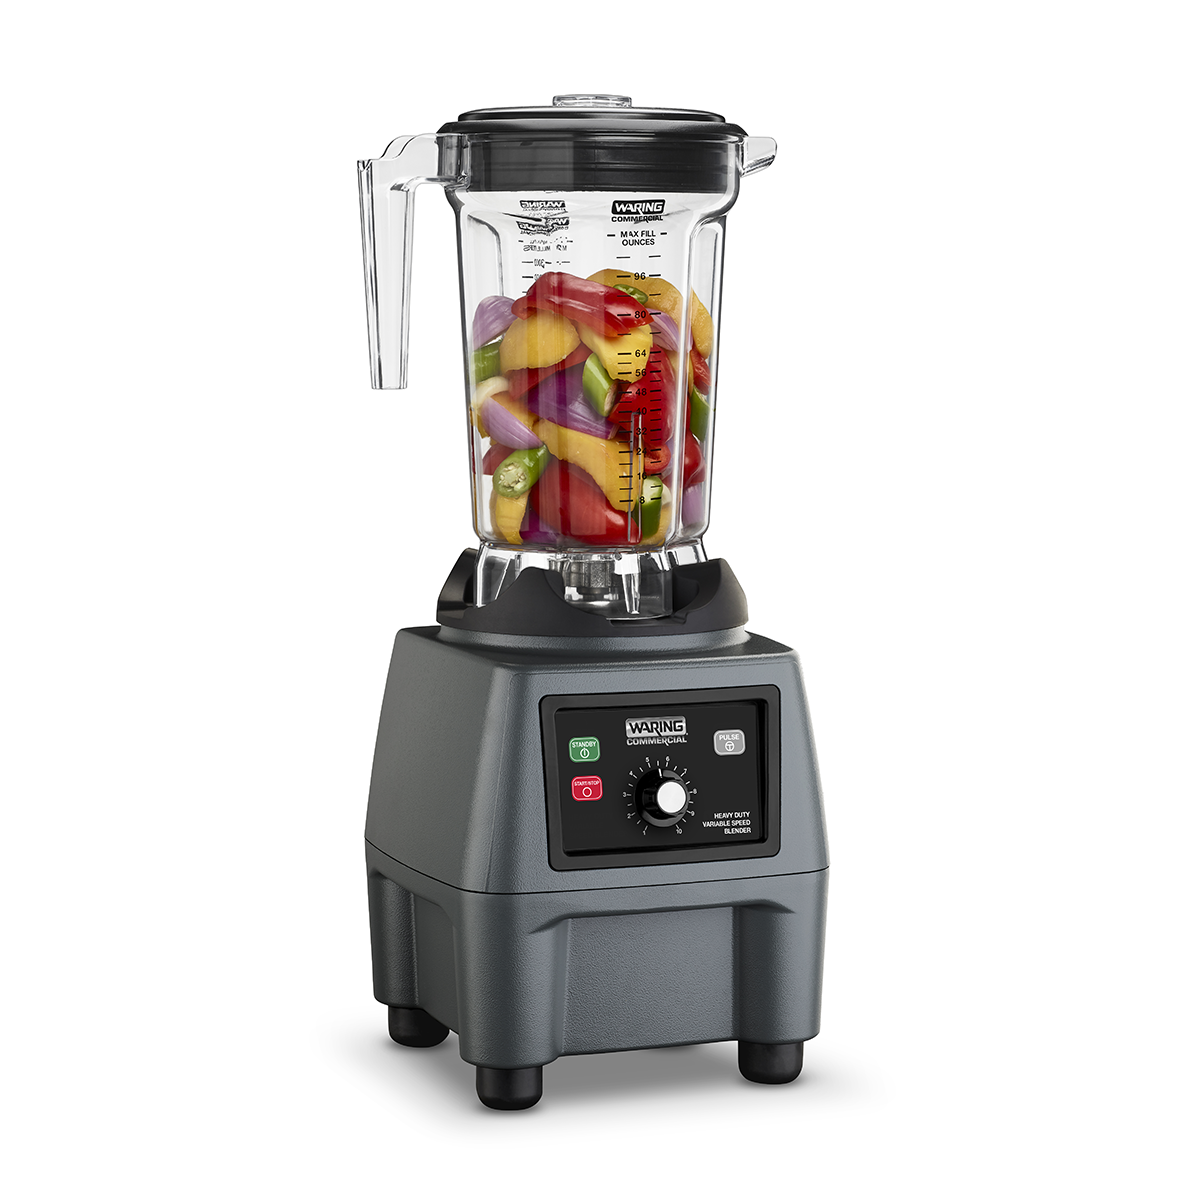 CB15VP Heavy-Duty One Gallon Variable Speed Food Blender with Copolyester Jar by Waring Commercial